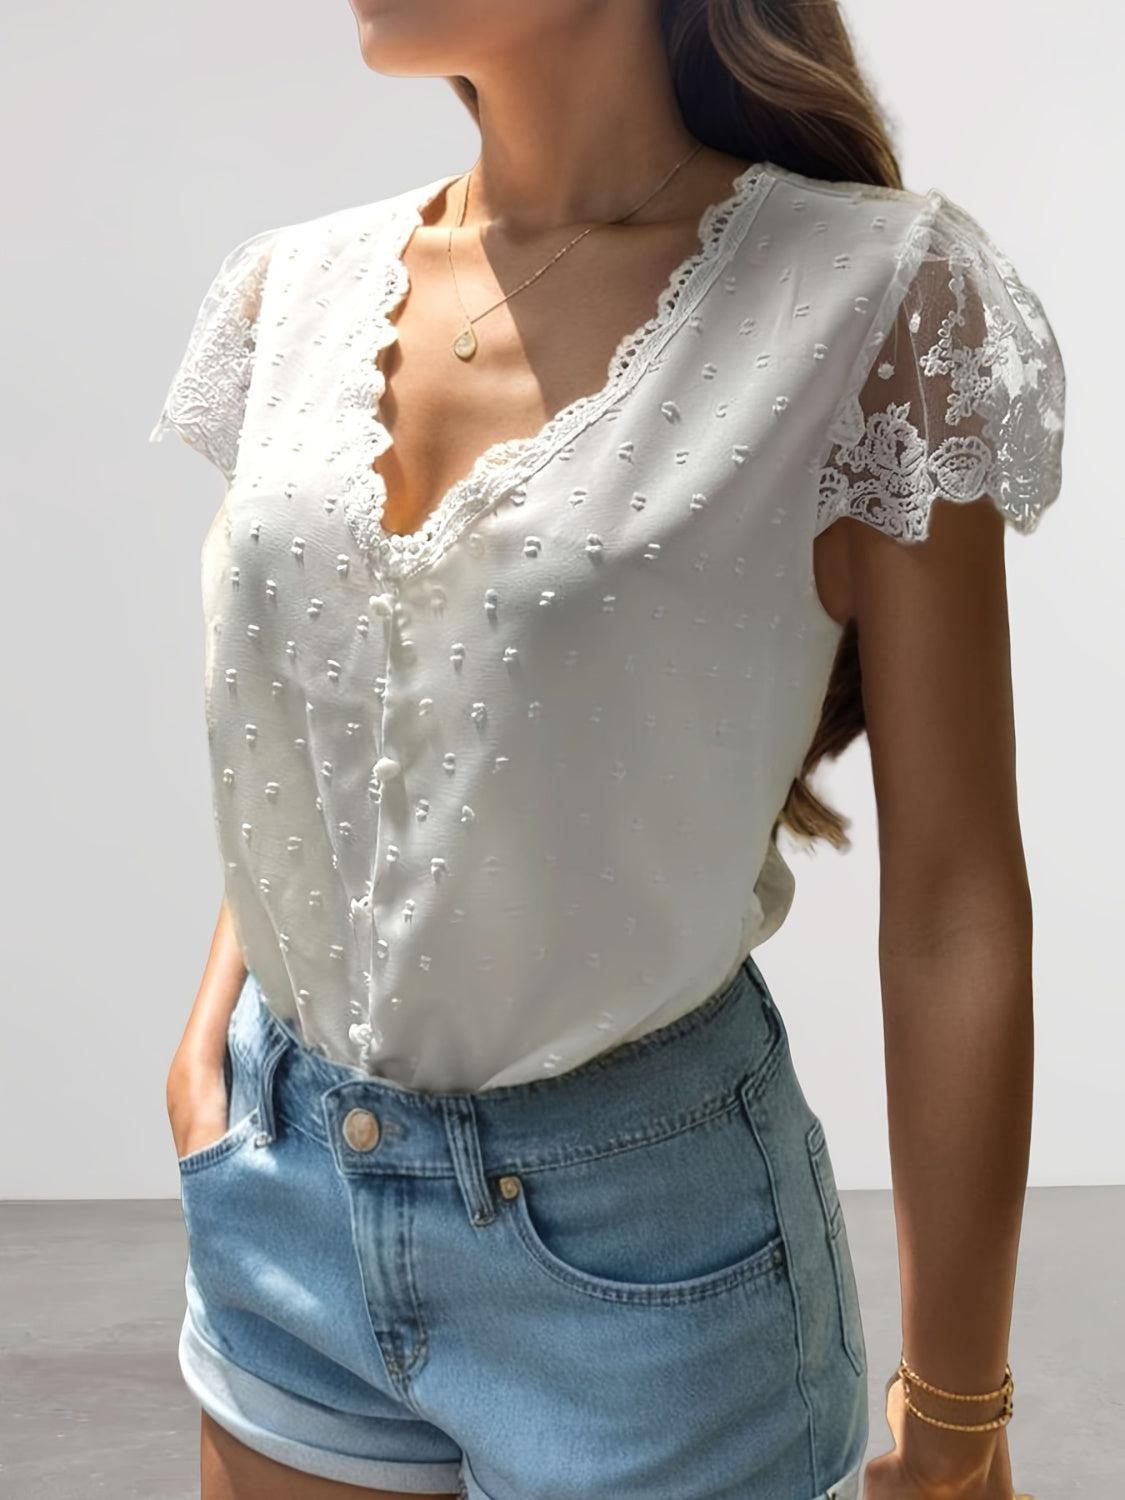 a woman wearing a white blouse and denim shorts